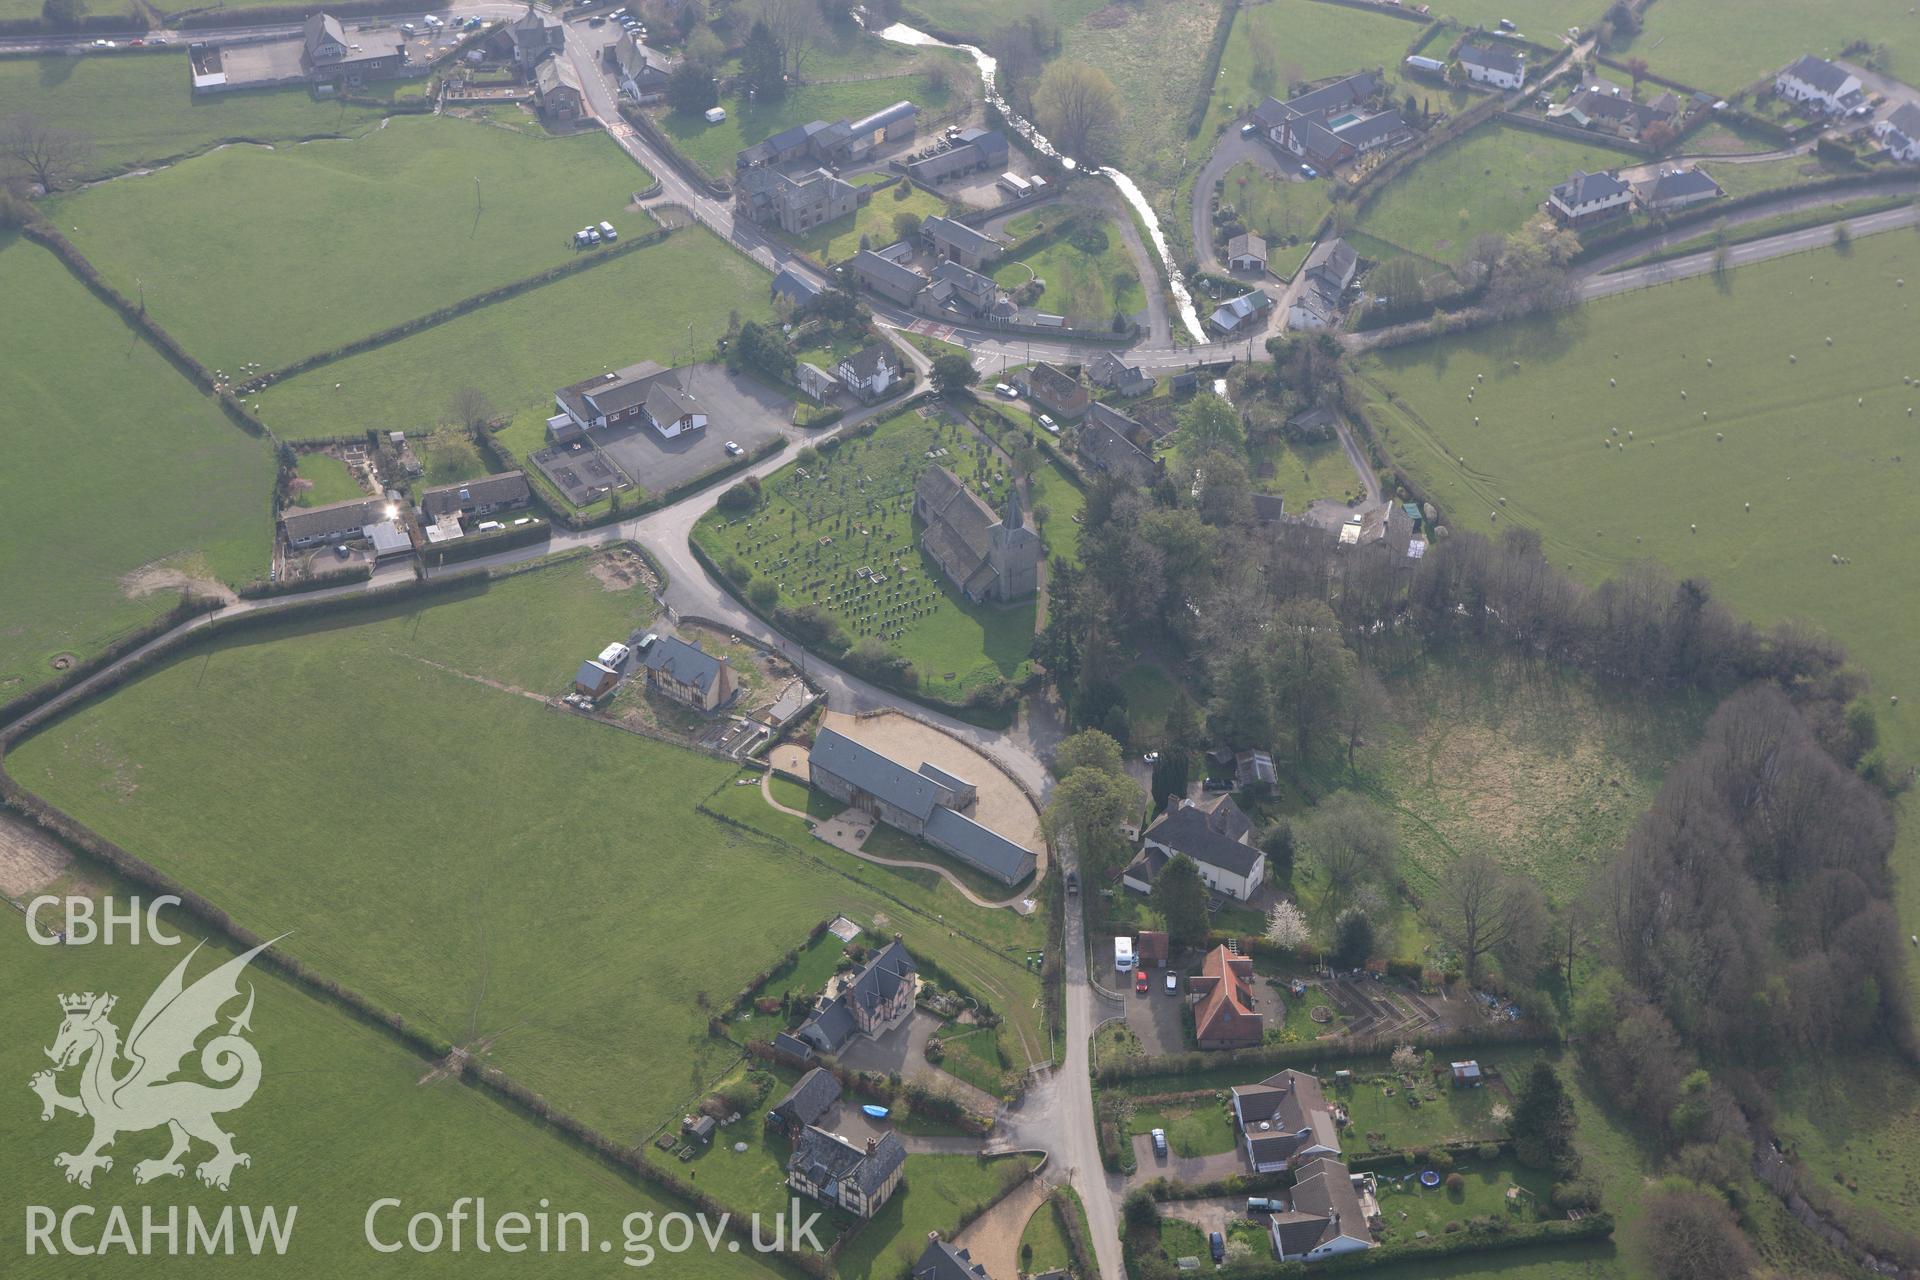 RCAHMW colour oblique aerial photograph of St Mary's in Gladestry Village. Taken on 21 April 2009 by Toby Driver